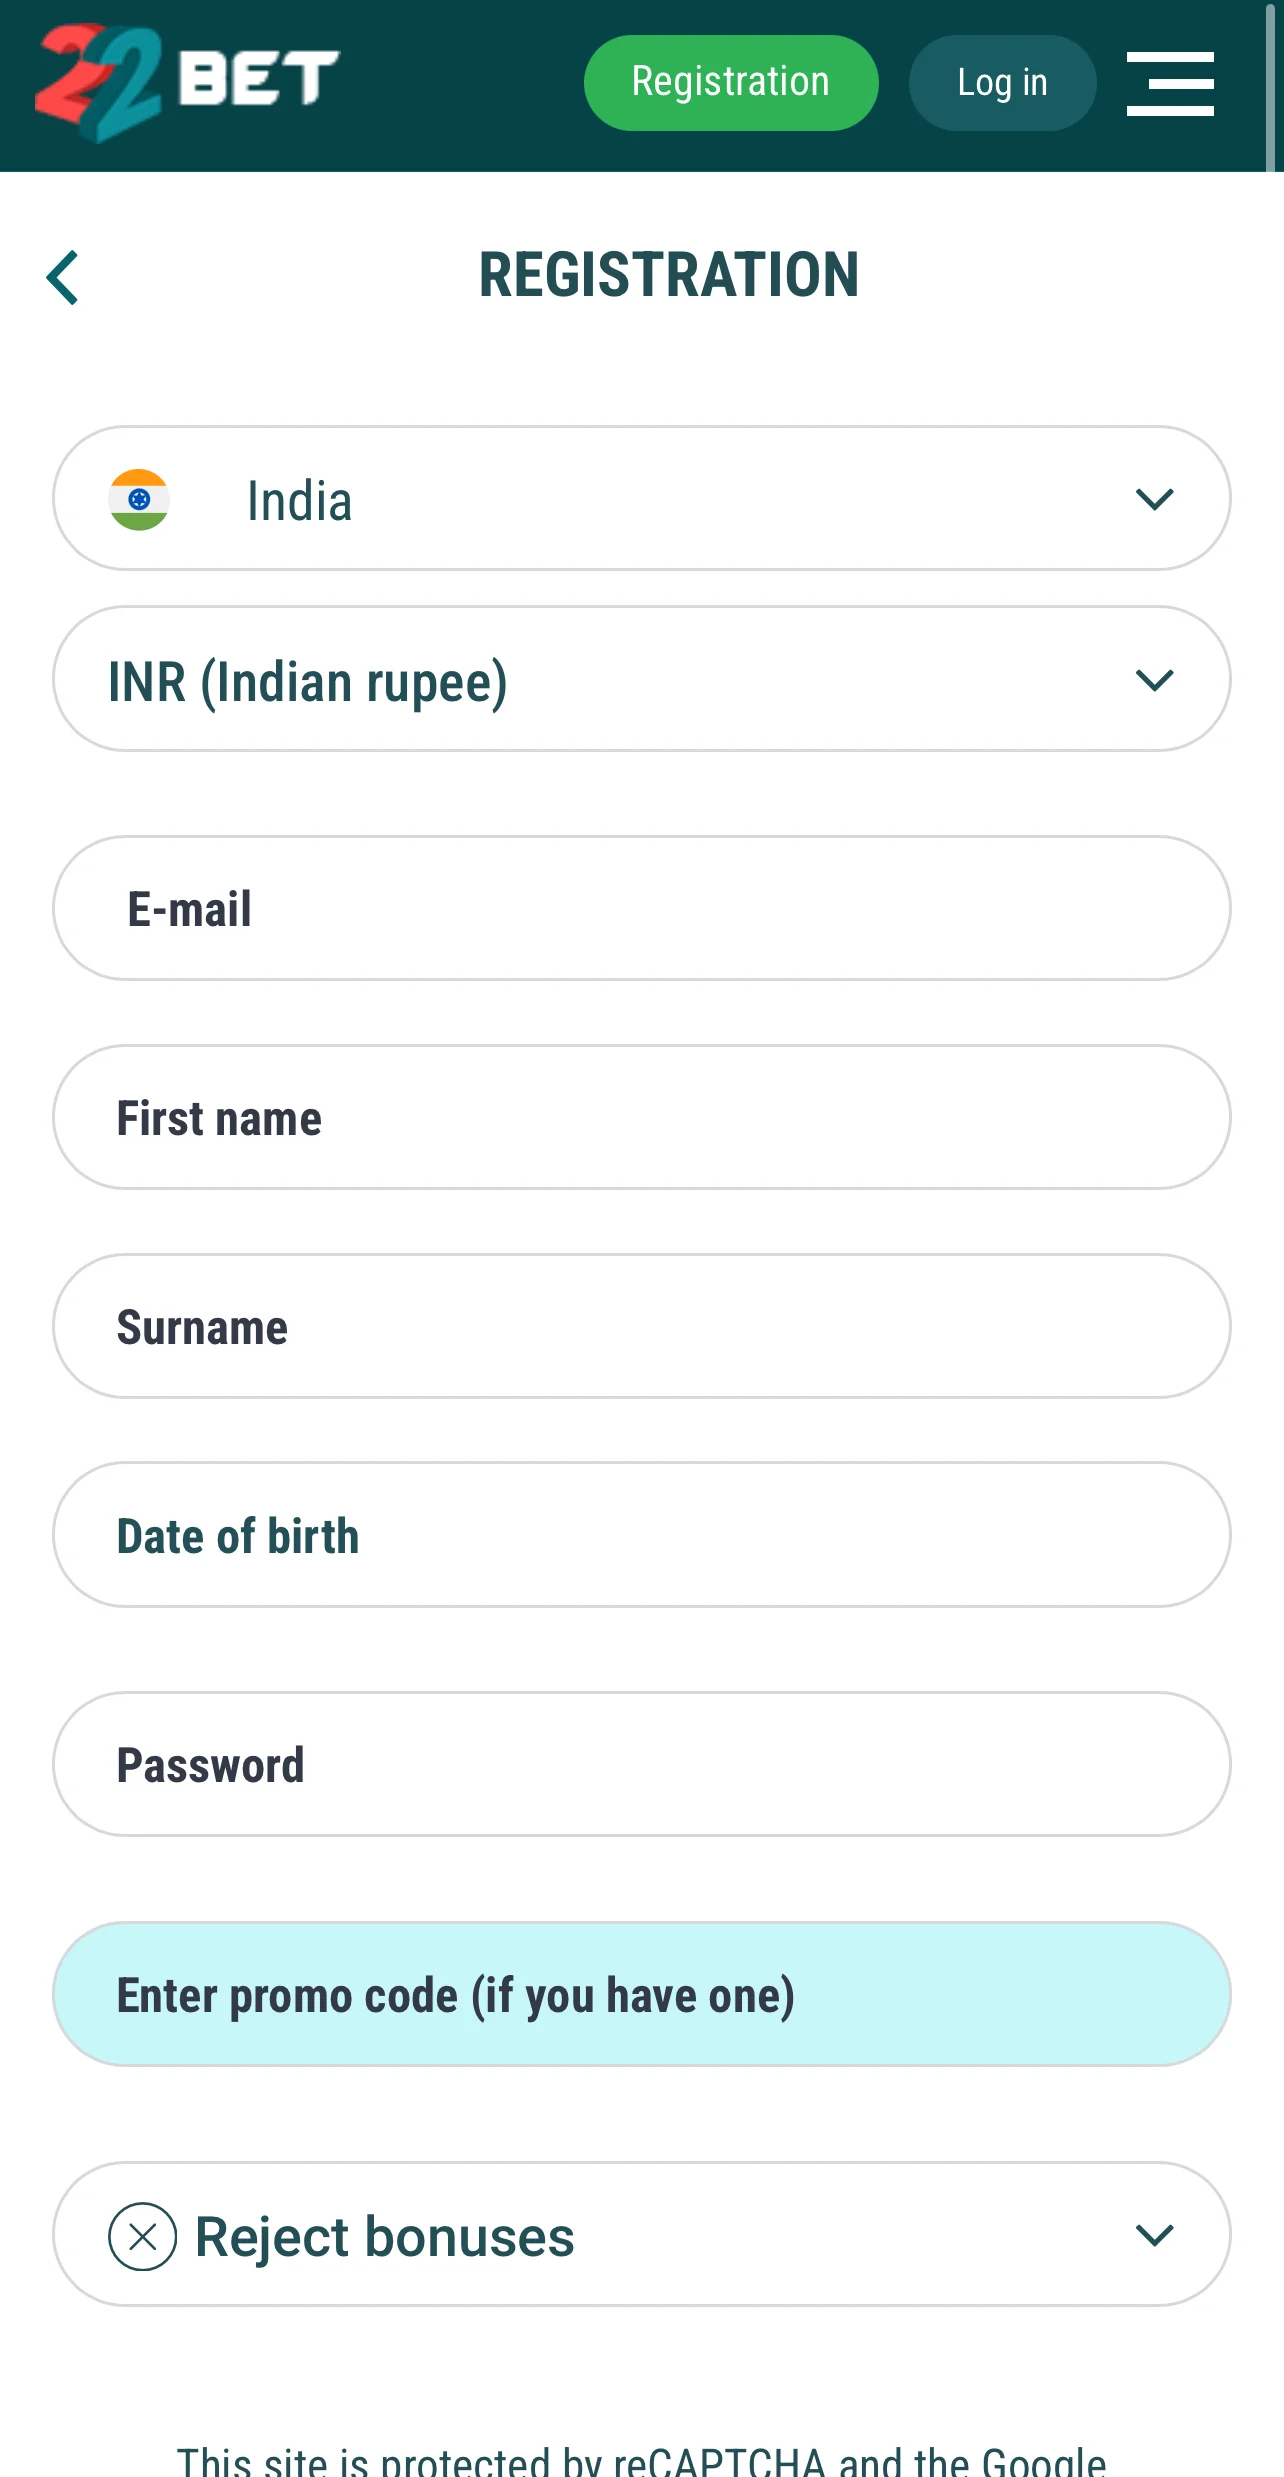 Registration form of the 22Bet app to create an account.